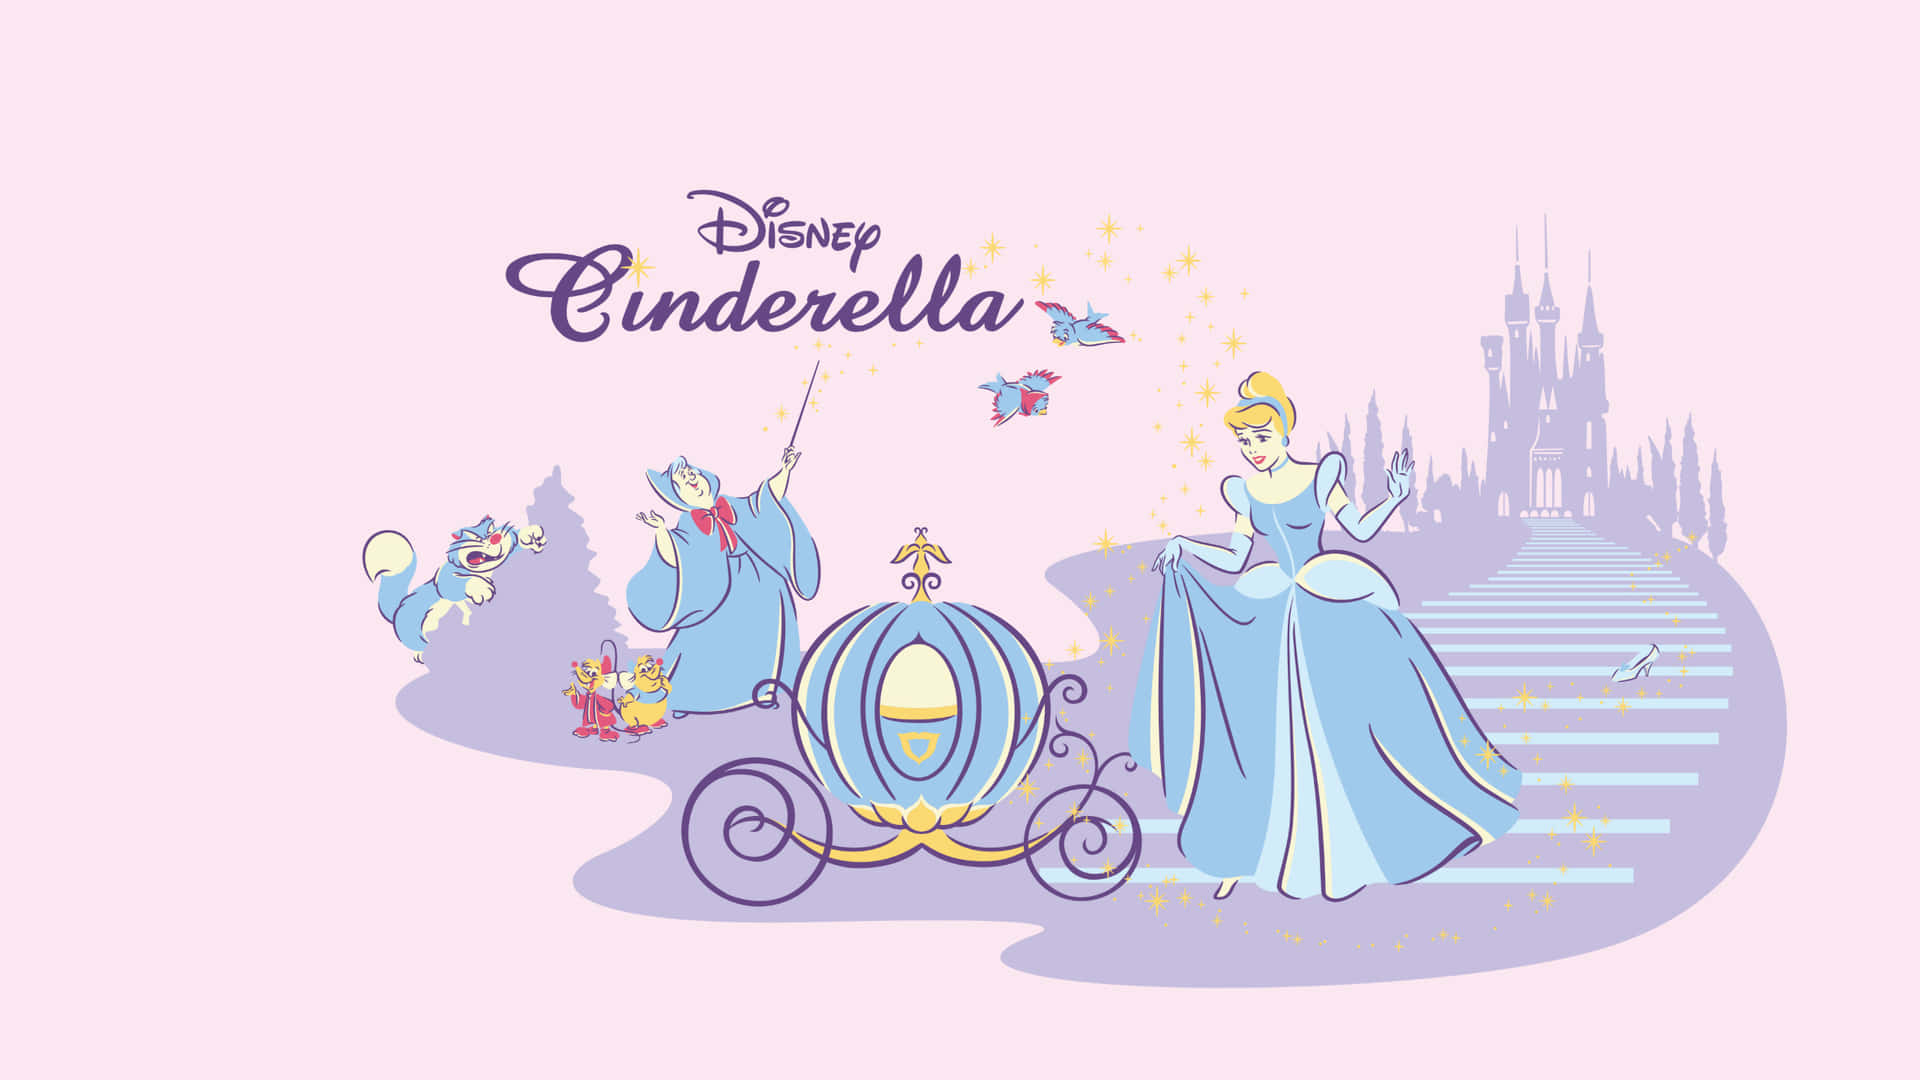 Cinderella escapes from her stepmother at midnight